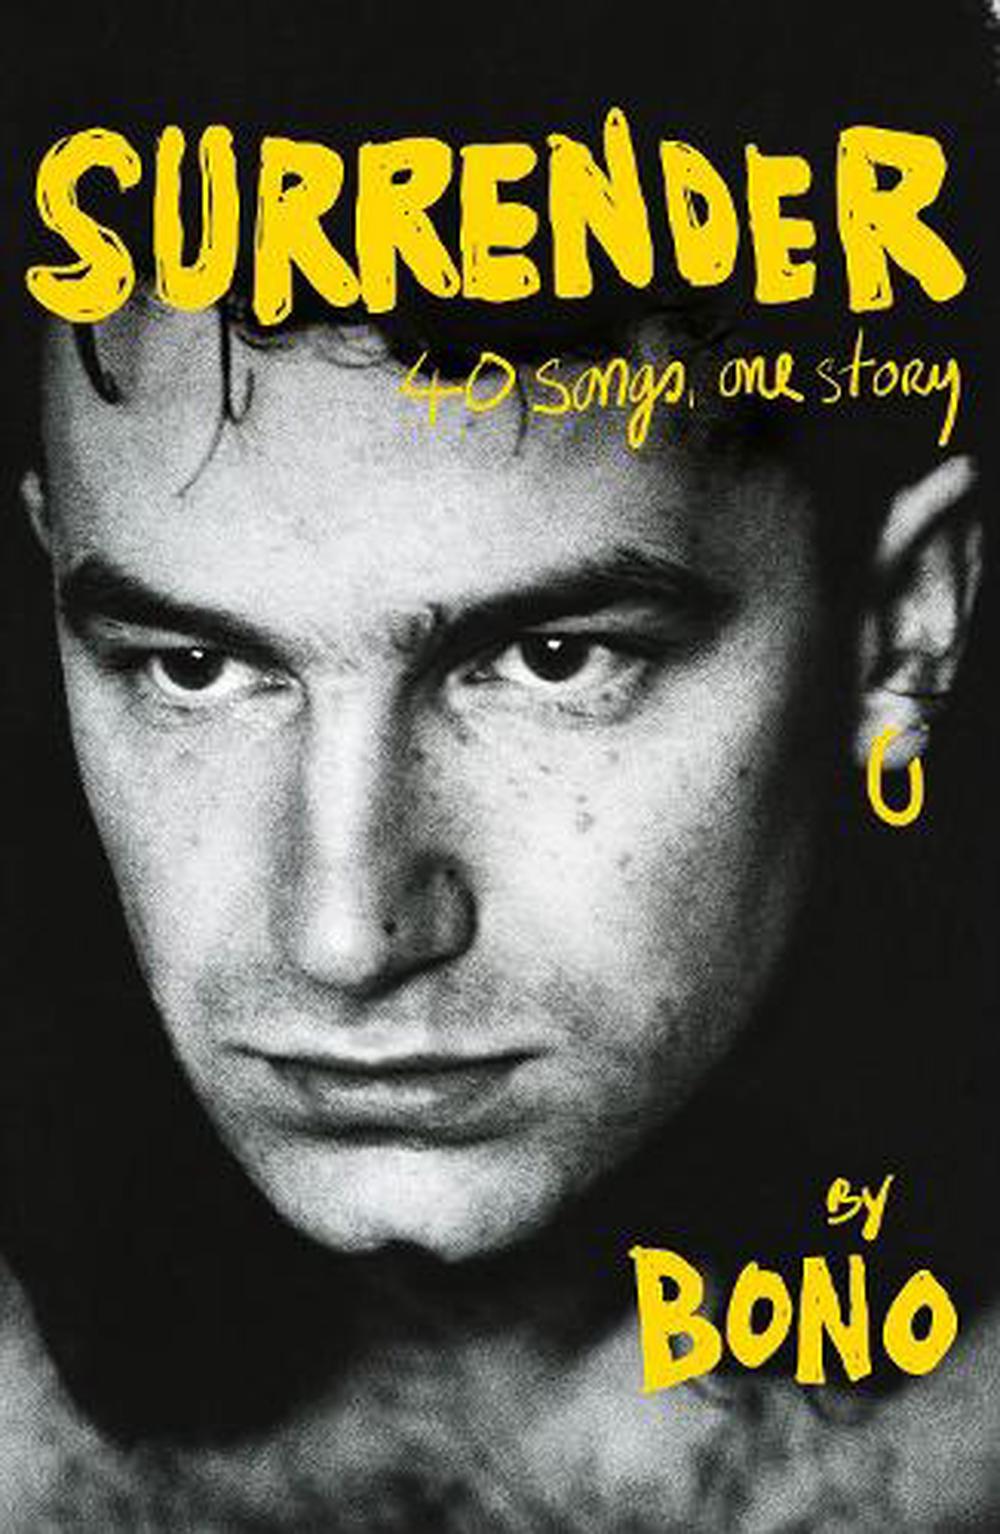 Songs,　at　Hardcover,　Story　The　Surrender:　online　by　40　Buy　9781529151787　One　Bono,　Nile